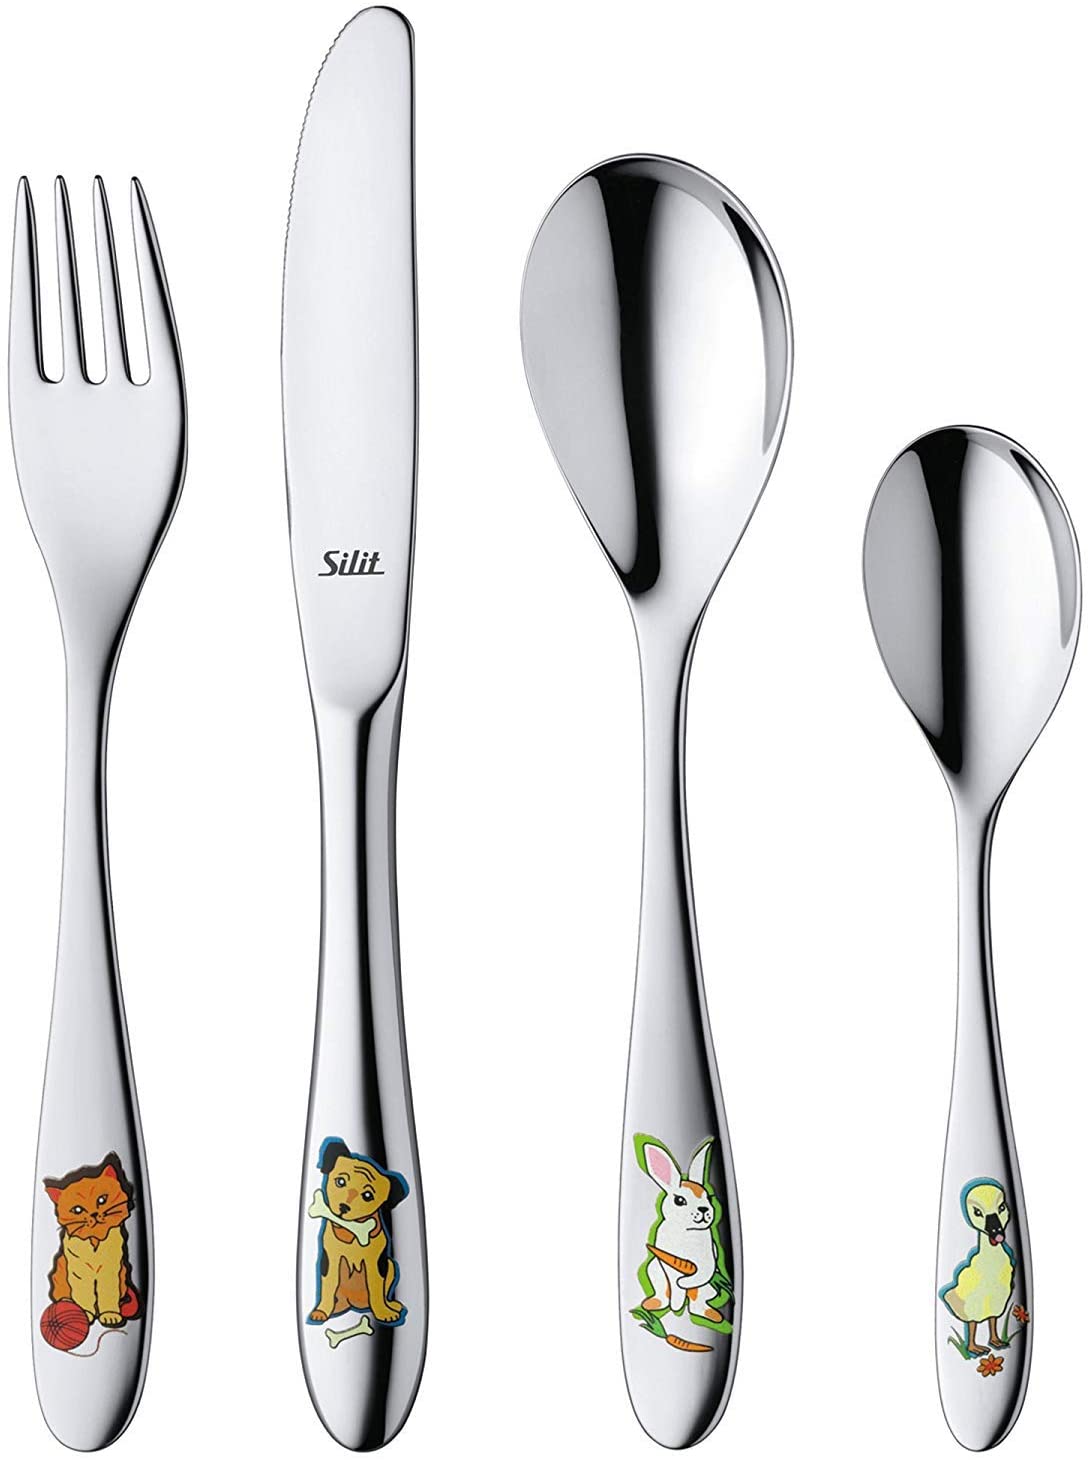 Childrens Cutlery 4 Pcs. Cuddly Toys, Crominox